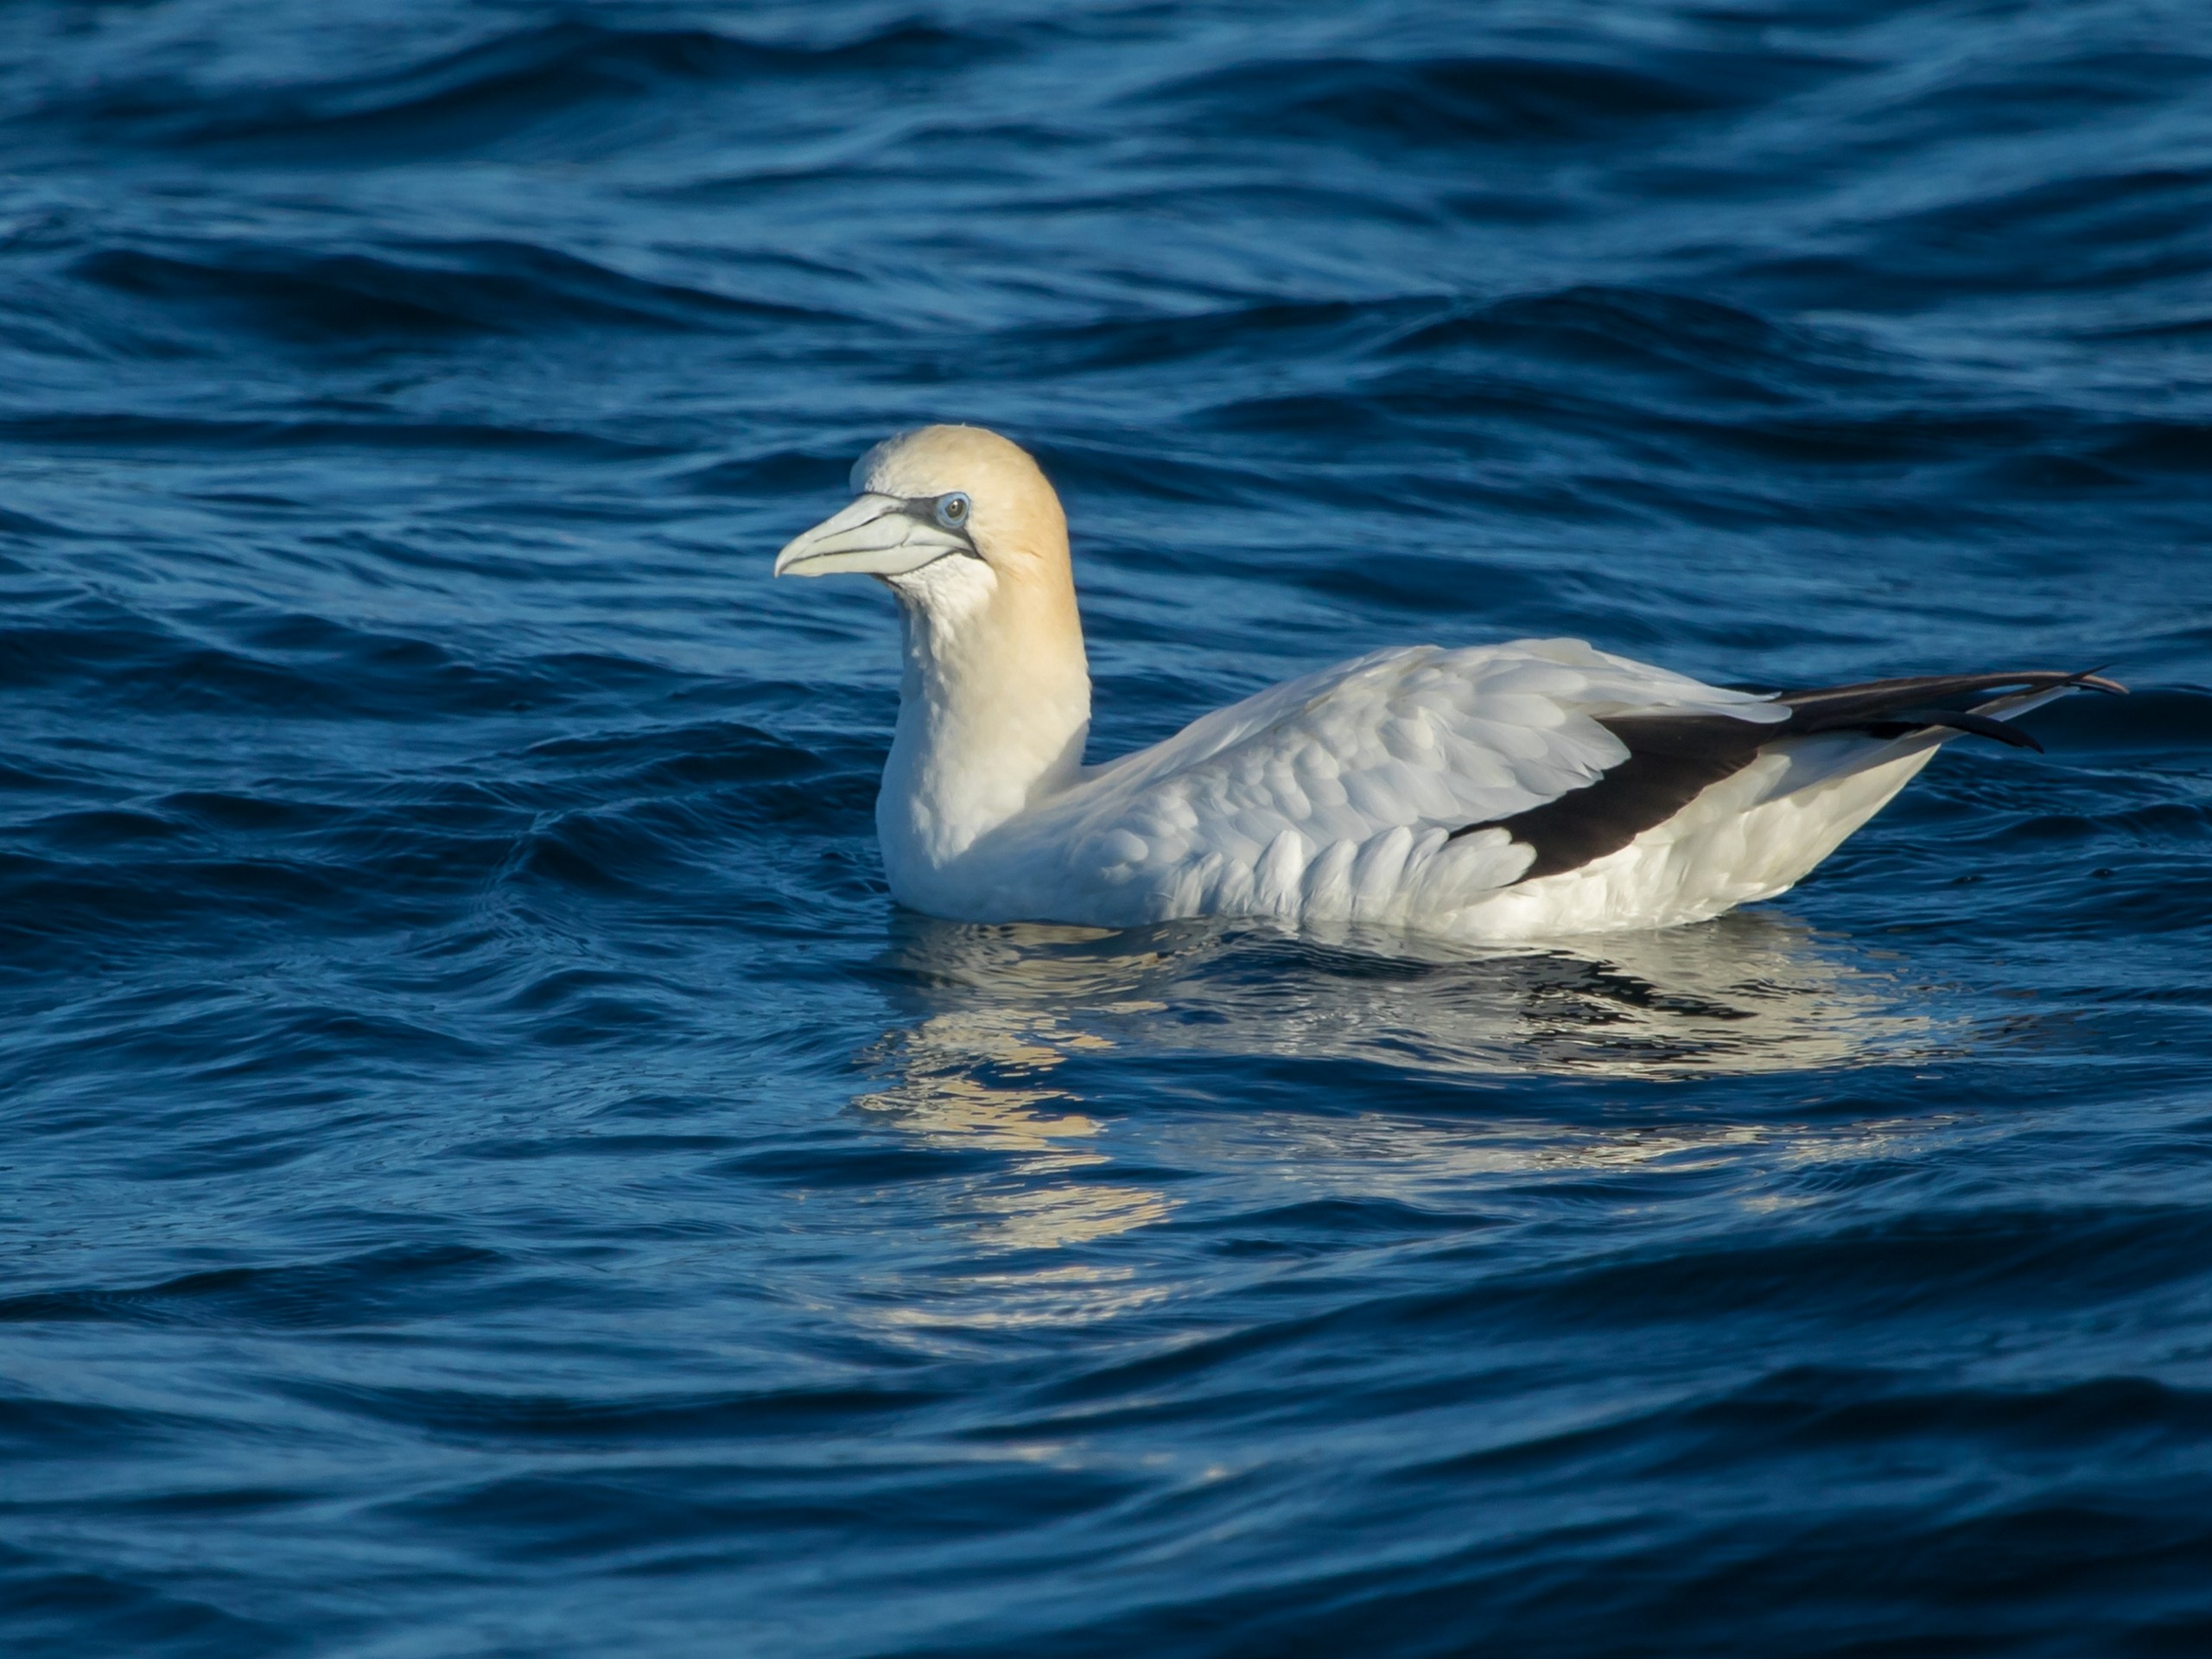 Australasian Gannet met while on a guided birdwatching tour in Australia